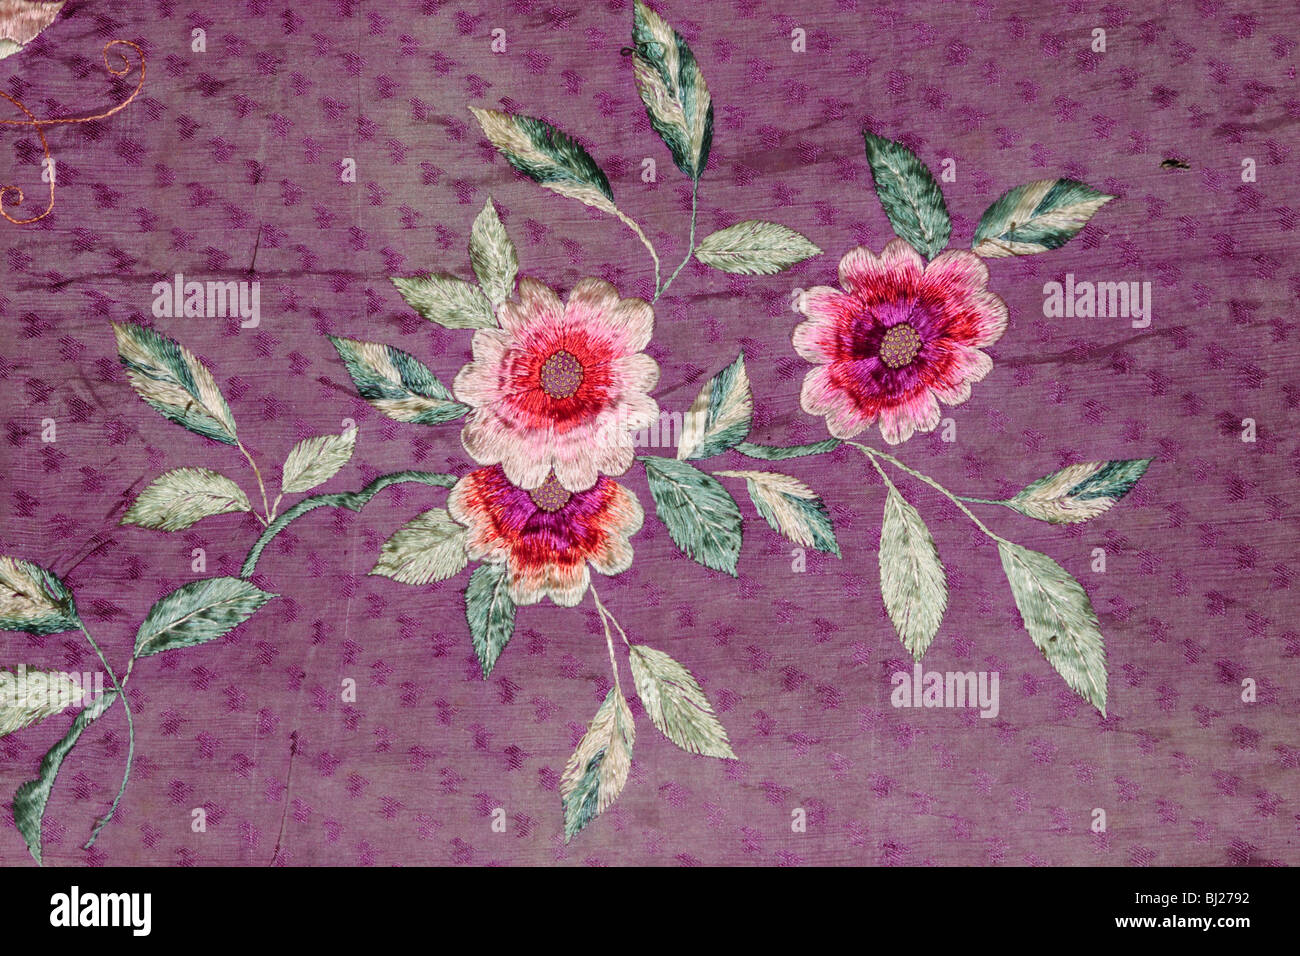 Antique Chinese silk fabric with hand embroidered floral design Stock Photo